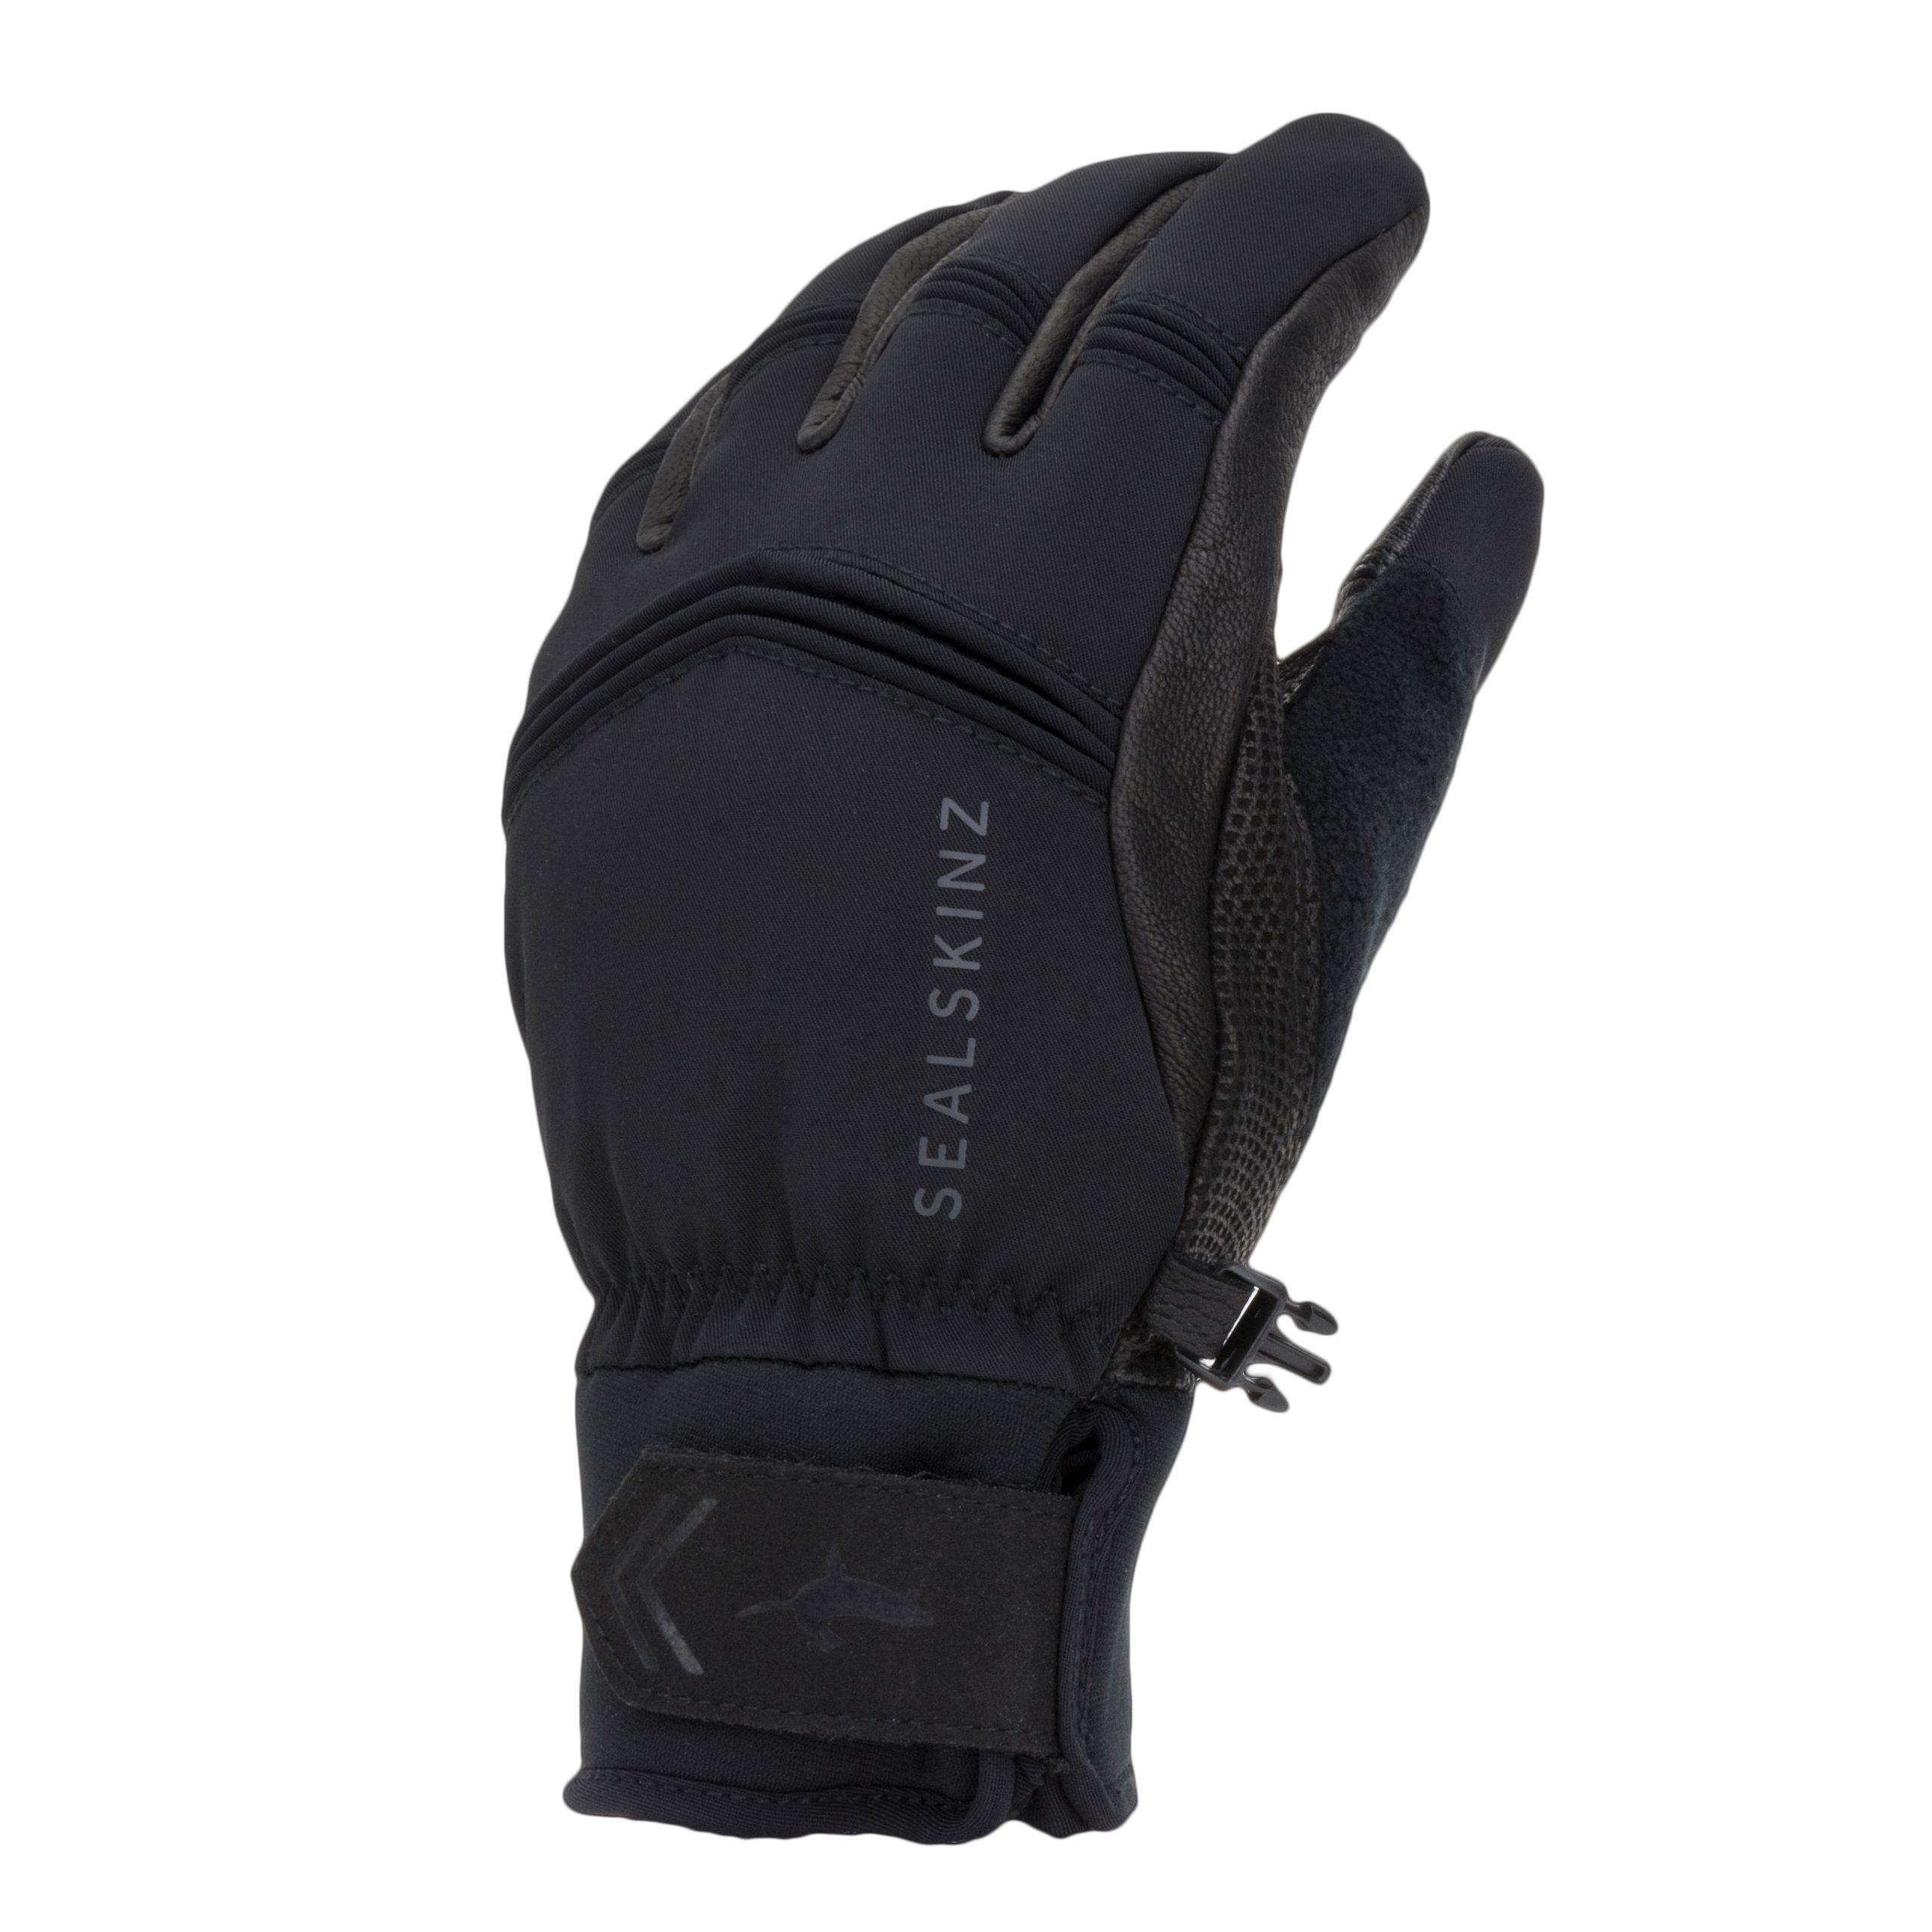 Sealskinz Waterproof Extreme Cold Weather Glove